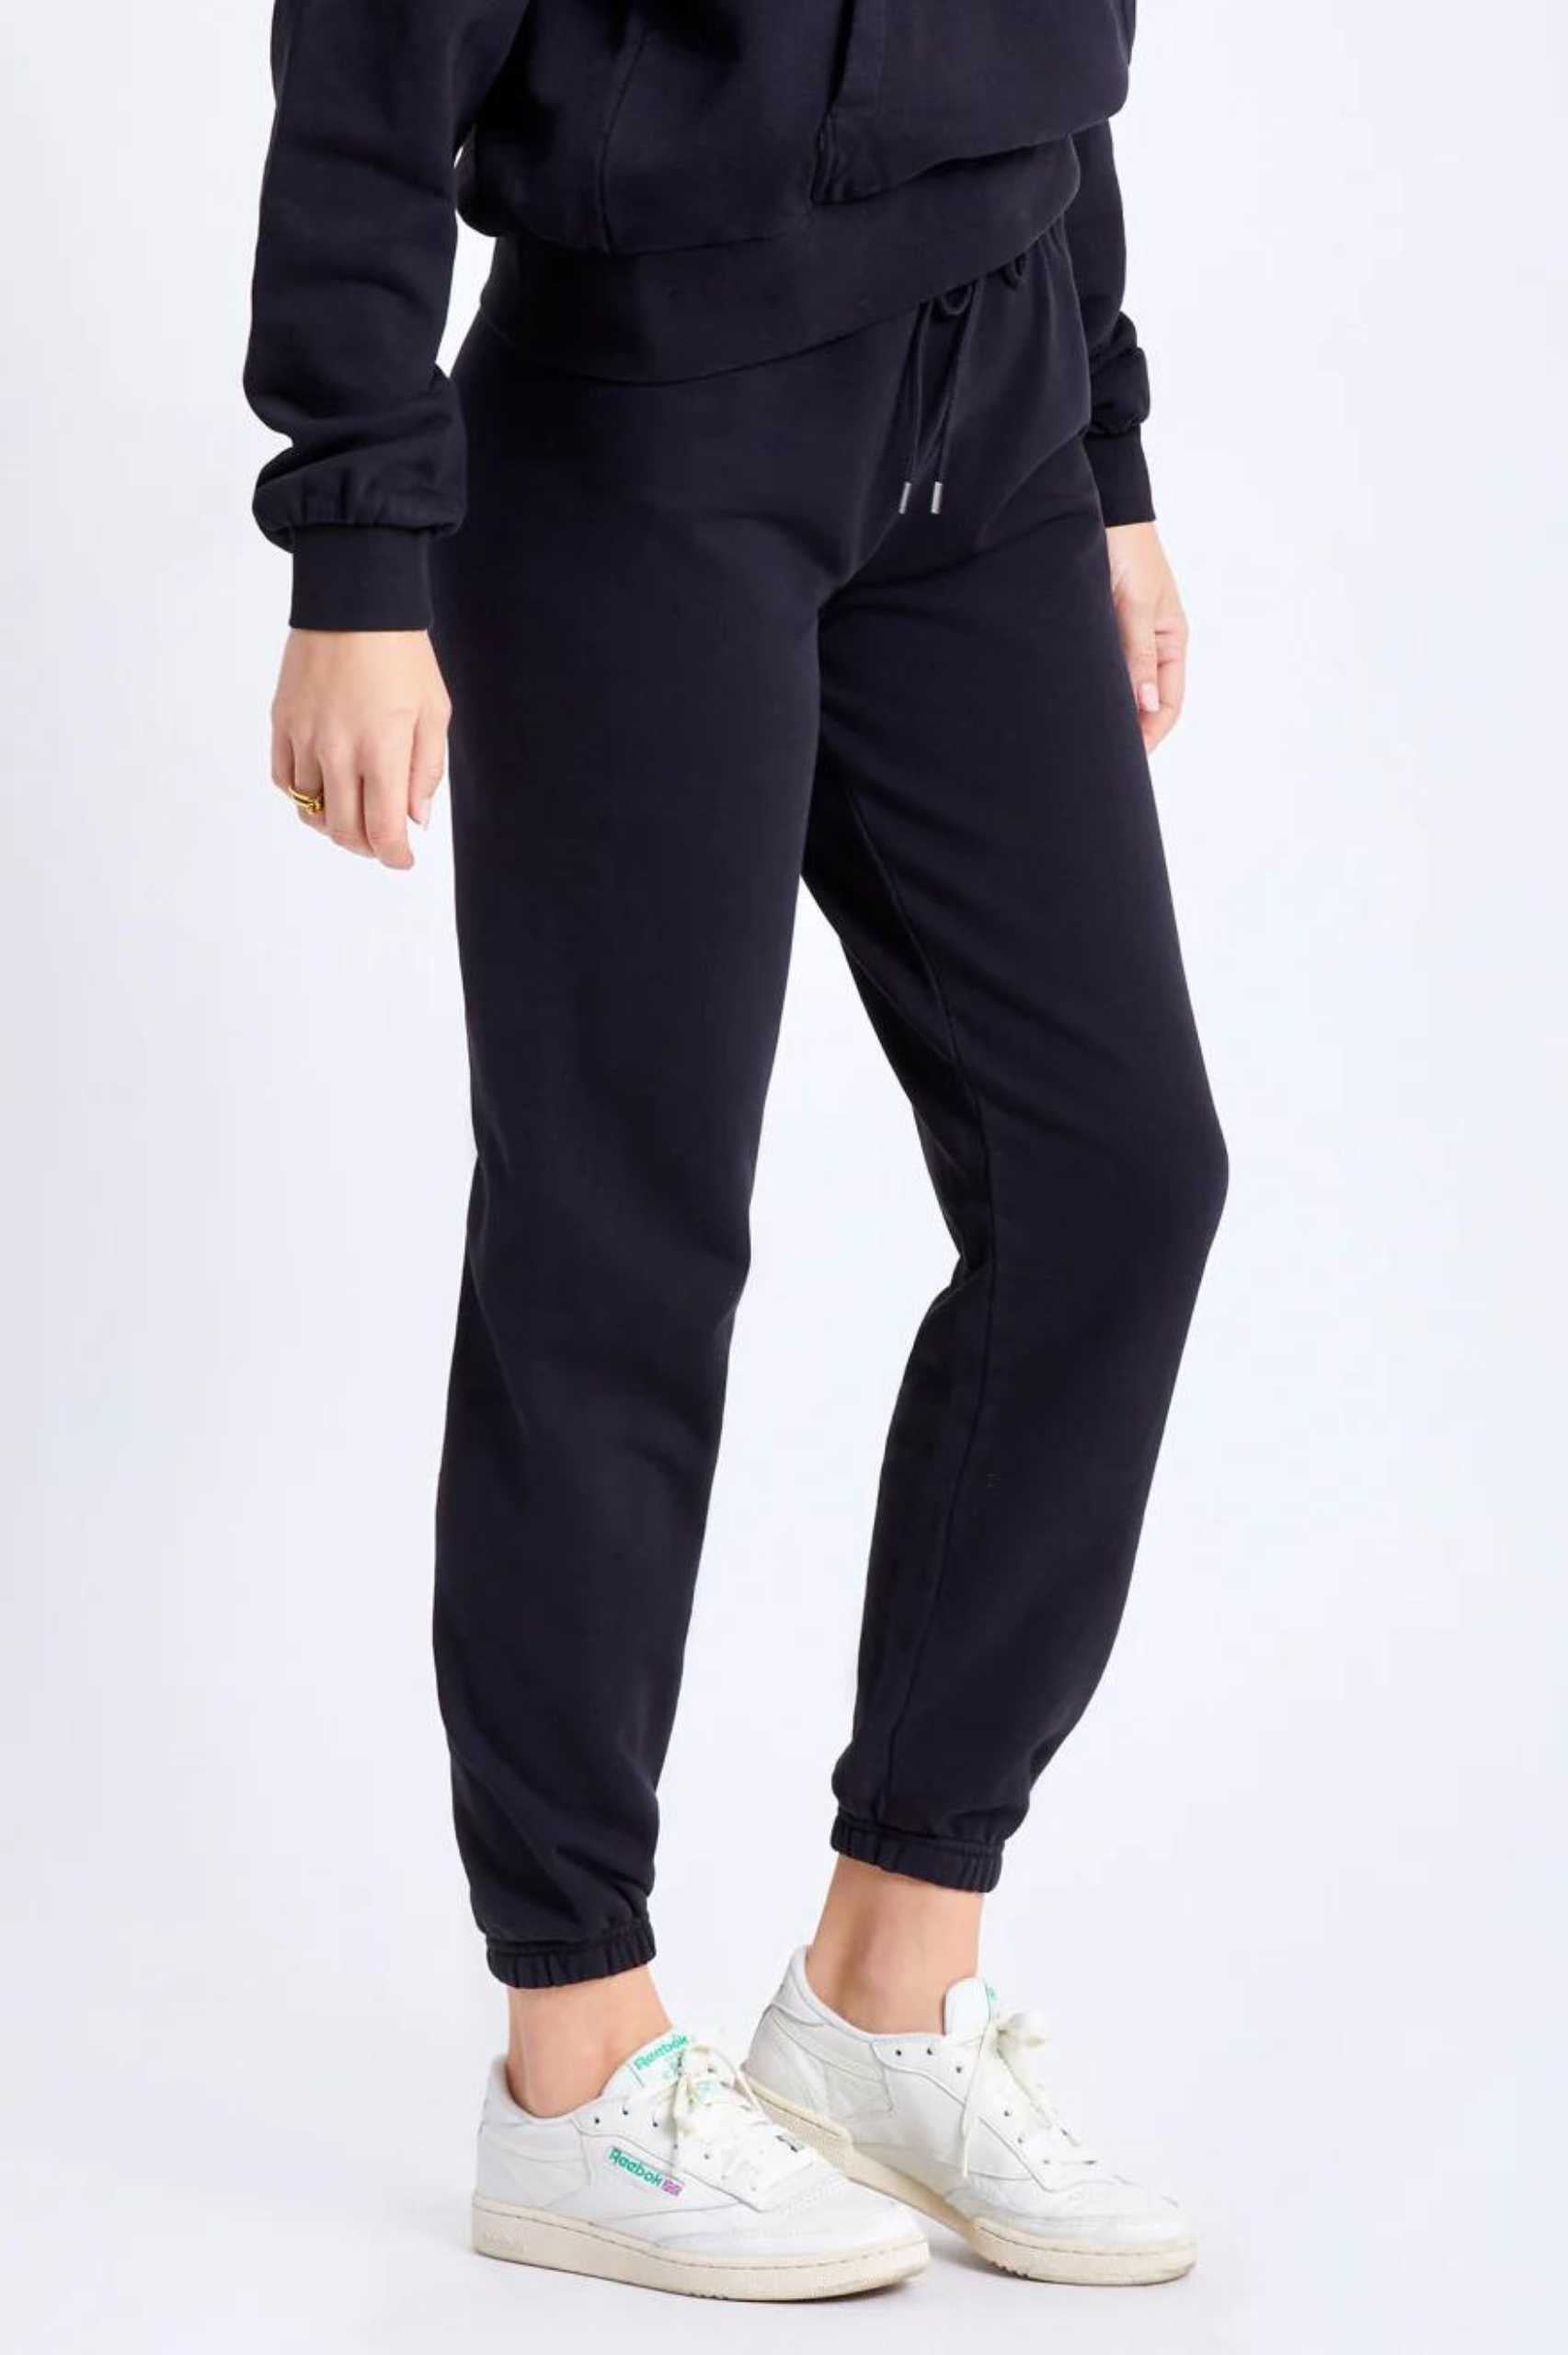 Brixton Womens Vintage French Terry Dye Sweatpant in Black